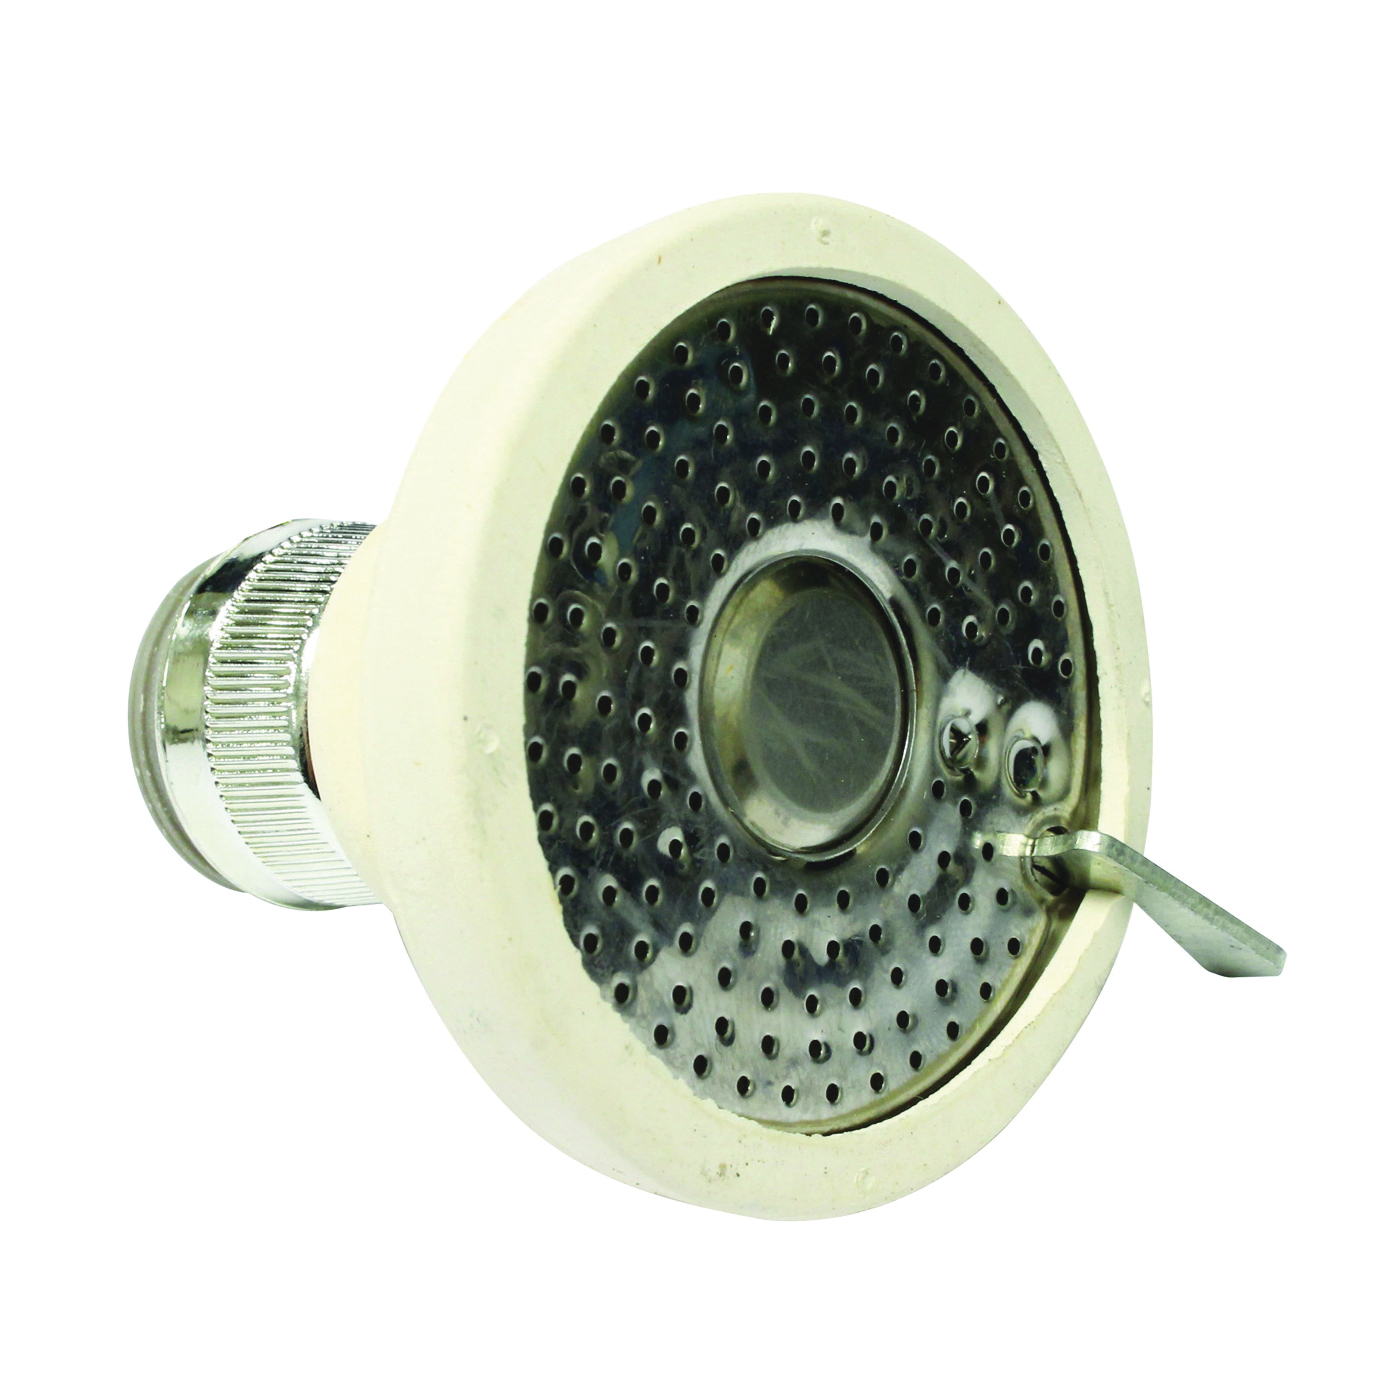 PP800-8 Faucet Aerator, 55/64-27 x 15/16-27 Male, Rubber